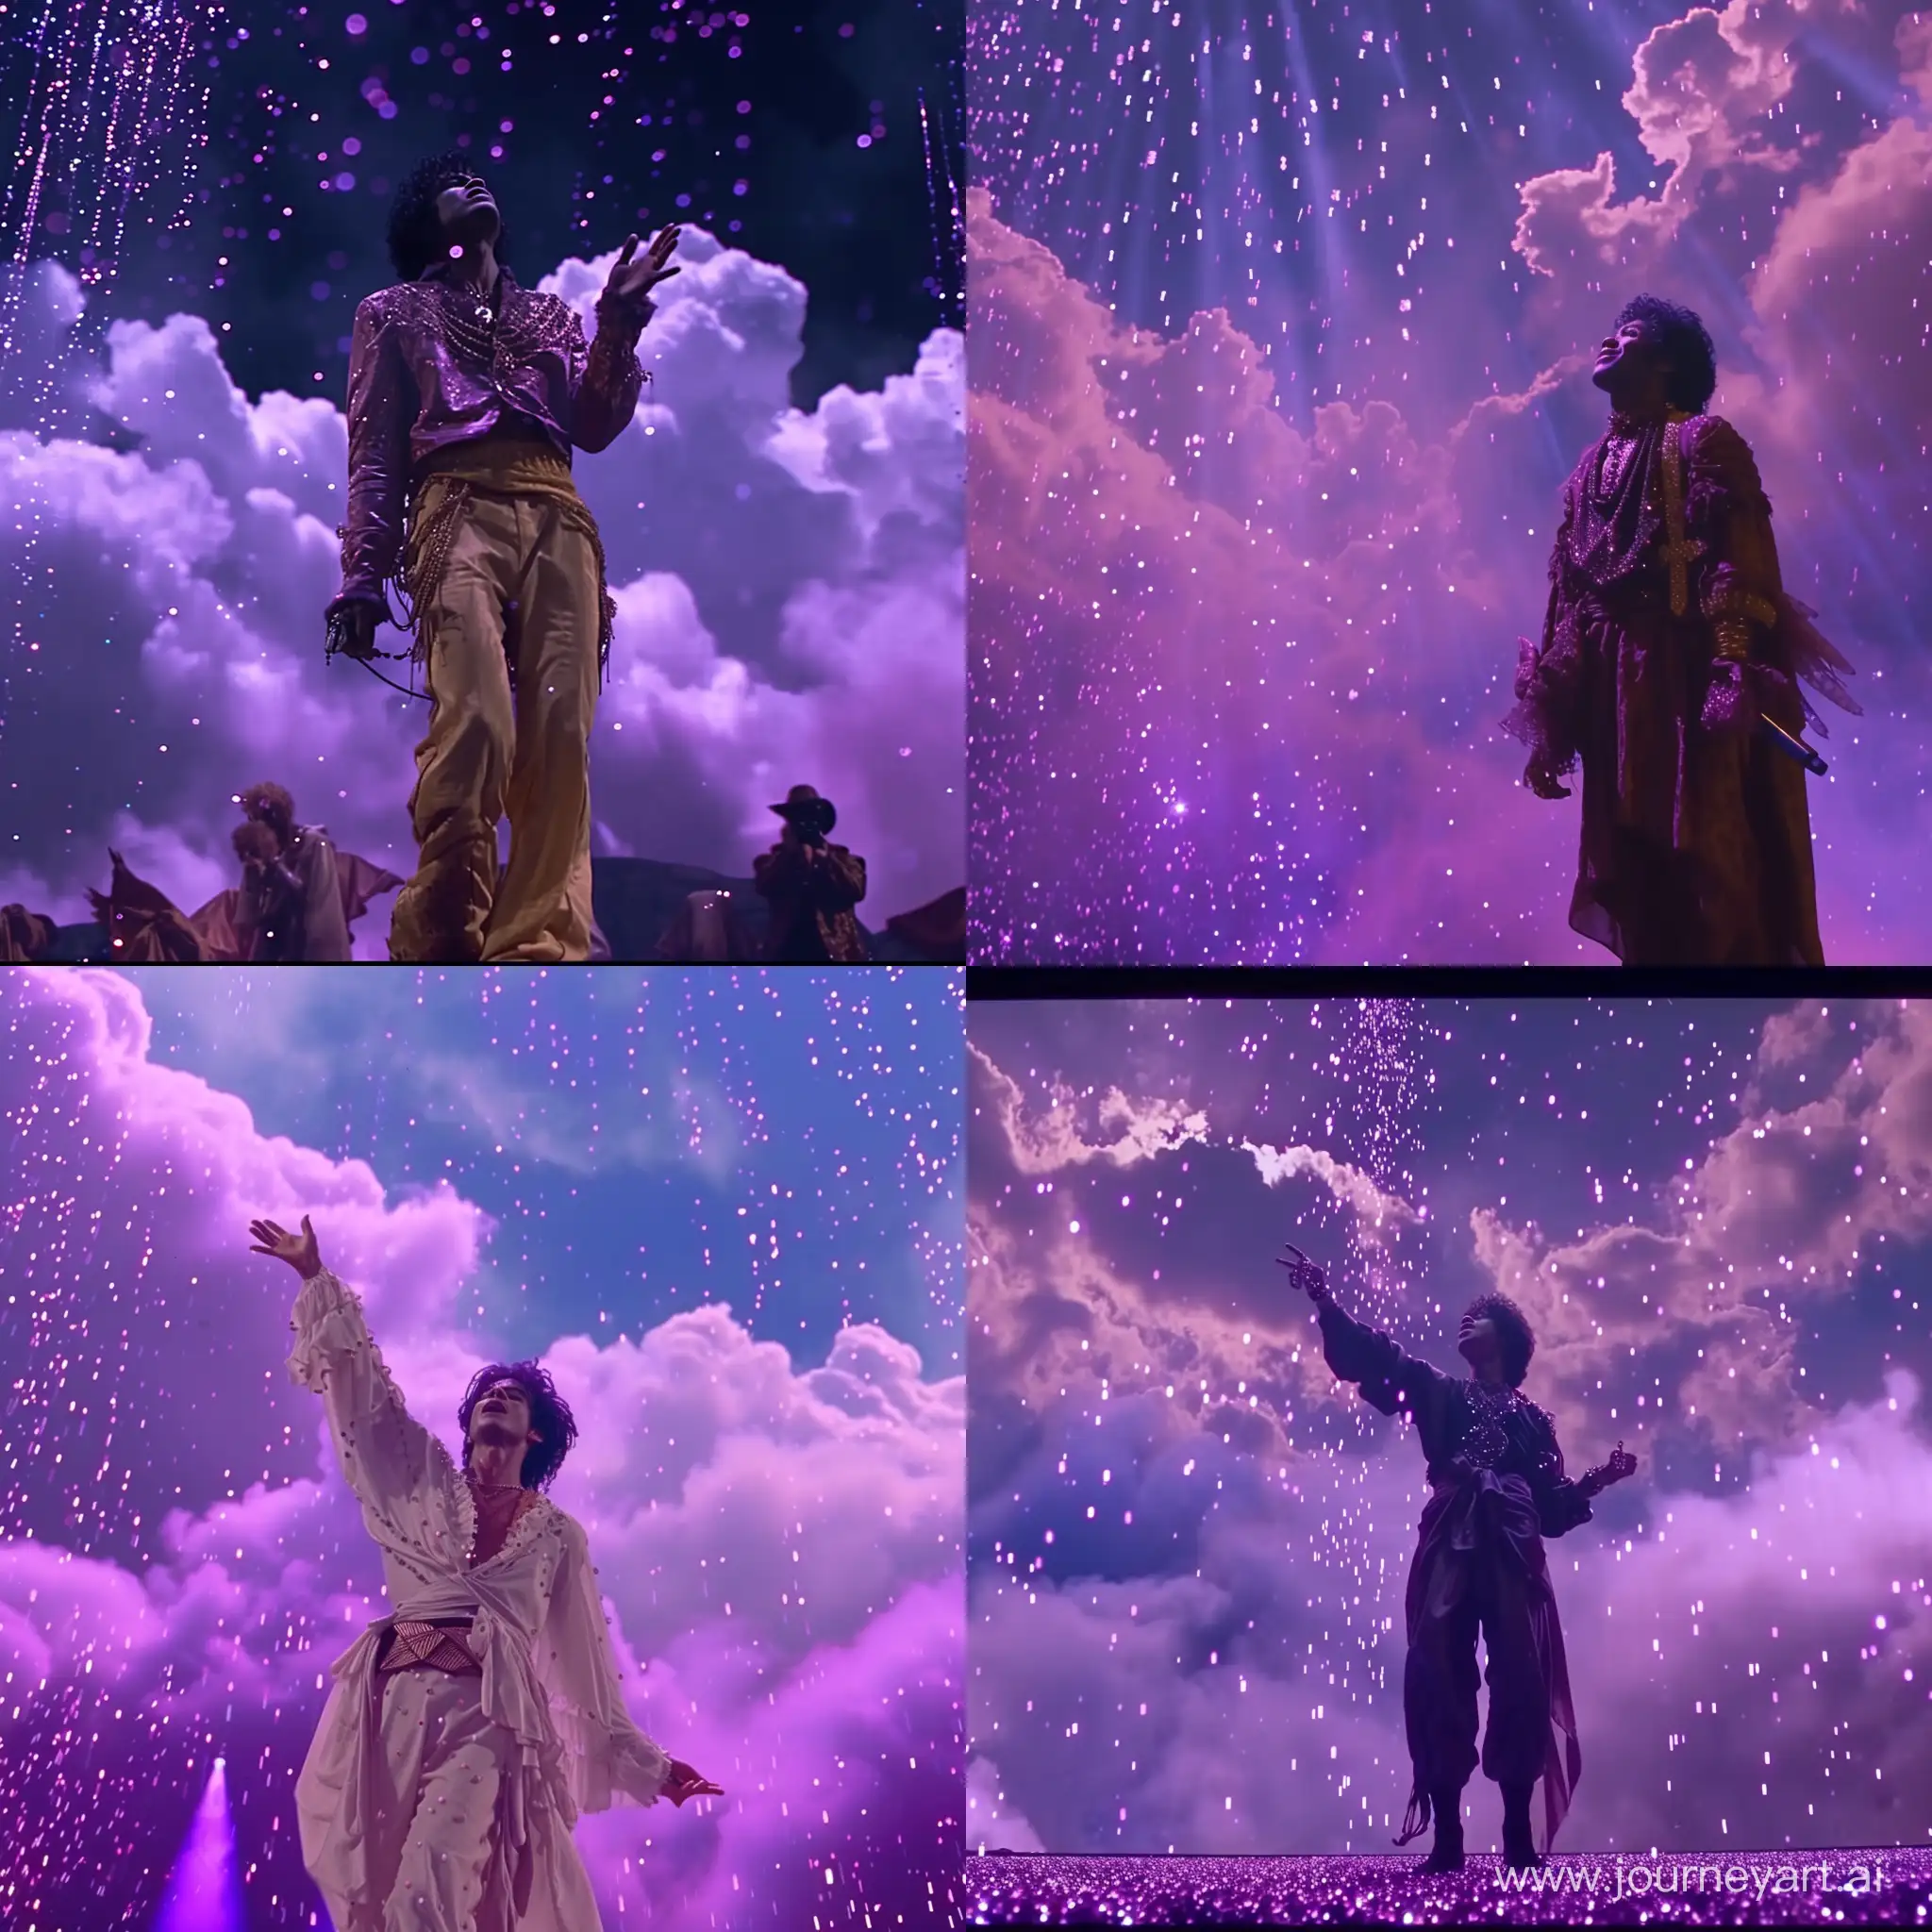 the singer prince on an open-air stage with purple clouds in the sky and purple glitter rain falling, screenshot from the dark crystal 1982